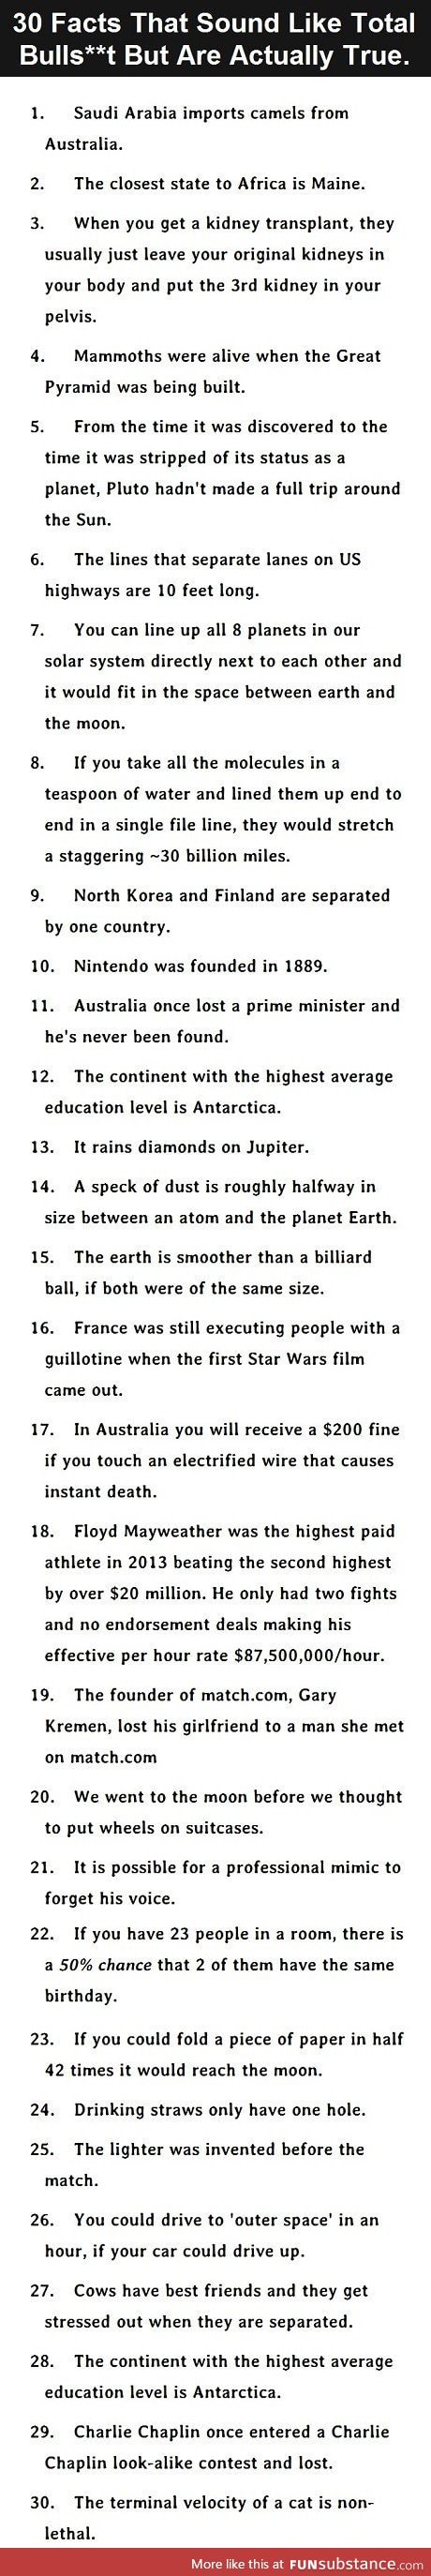 30 Facts that sound like BS